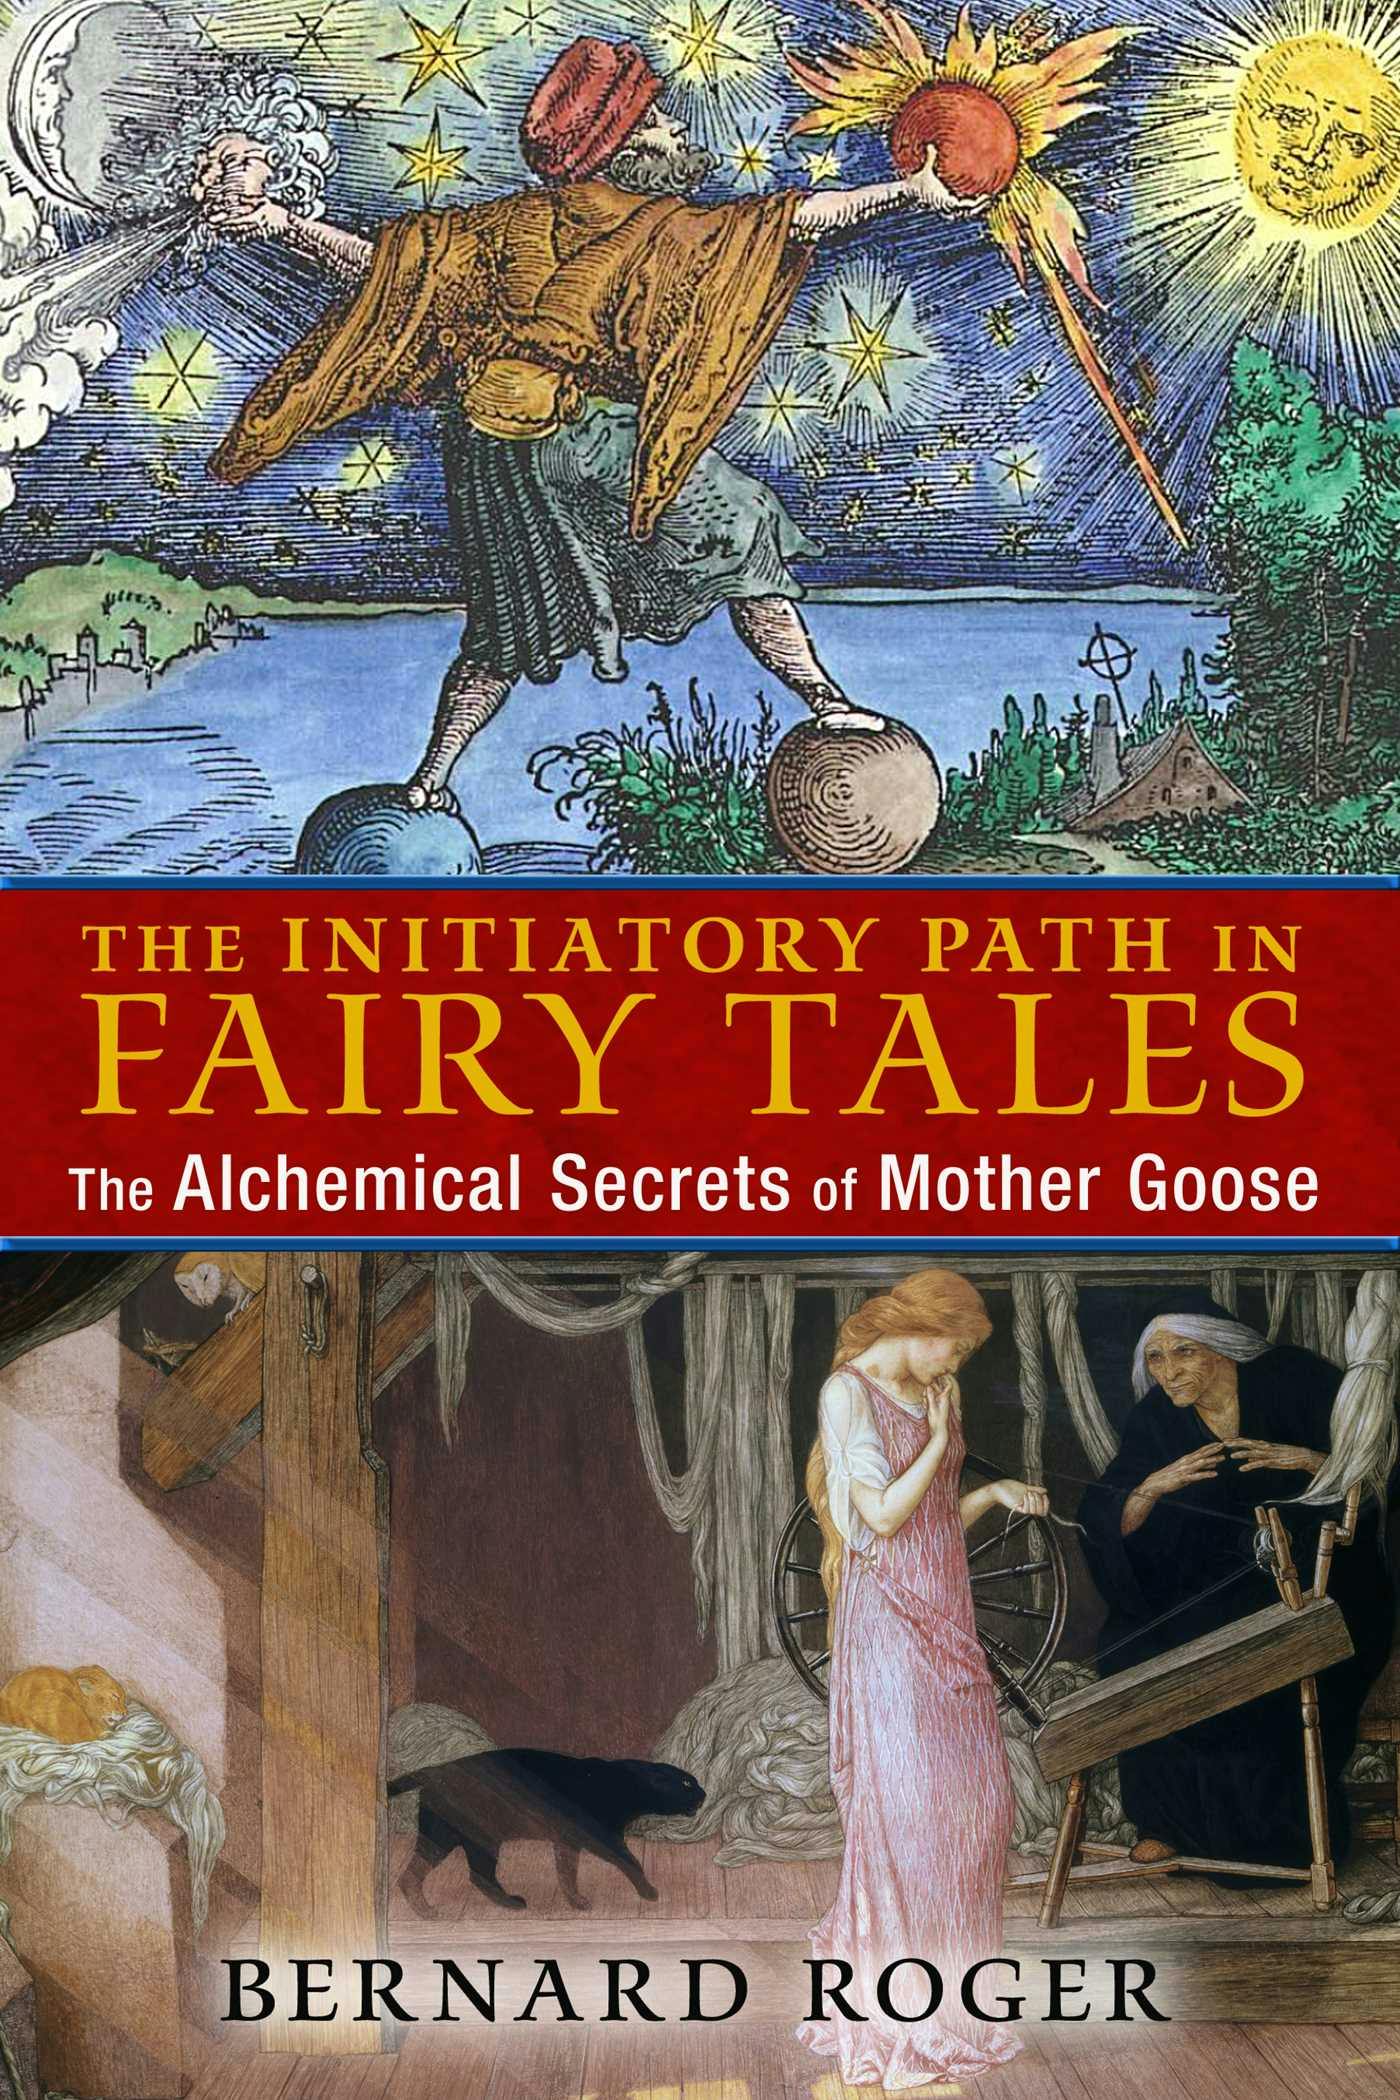 The Initiatory Path in Fairy Tales: The Alchemical Secrets of Mother Goose - Bernard Roger